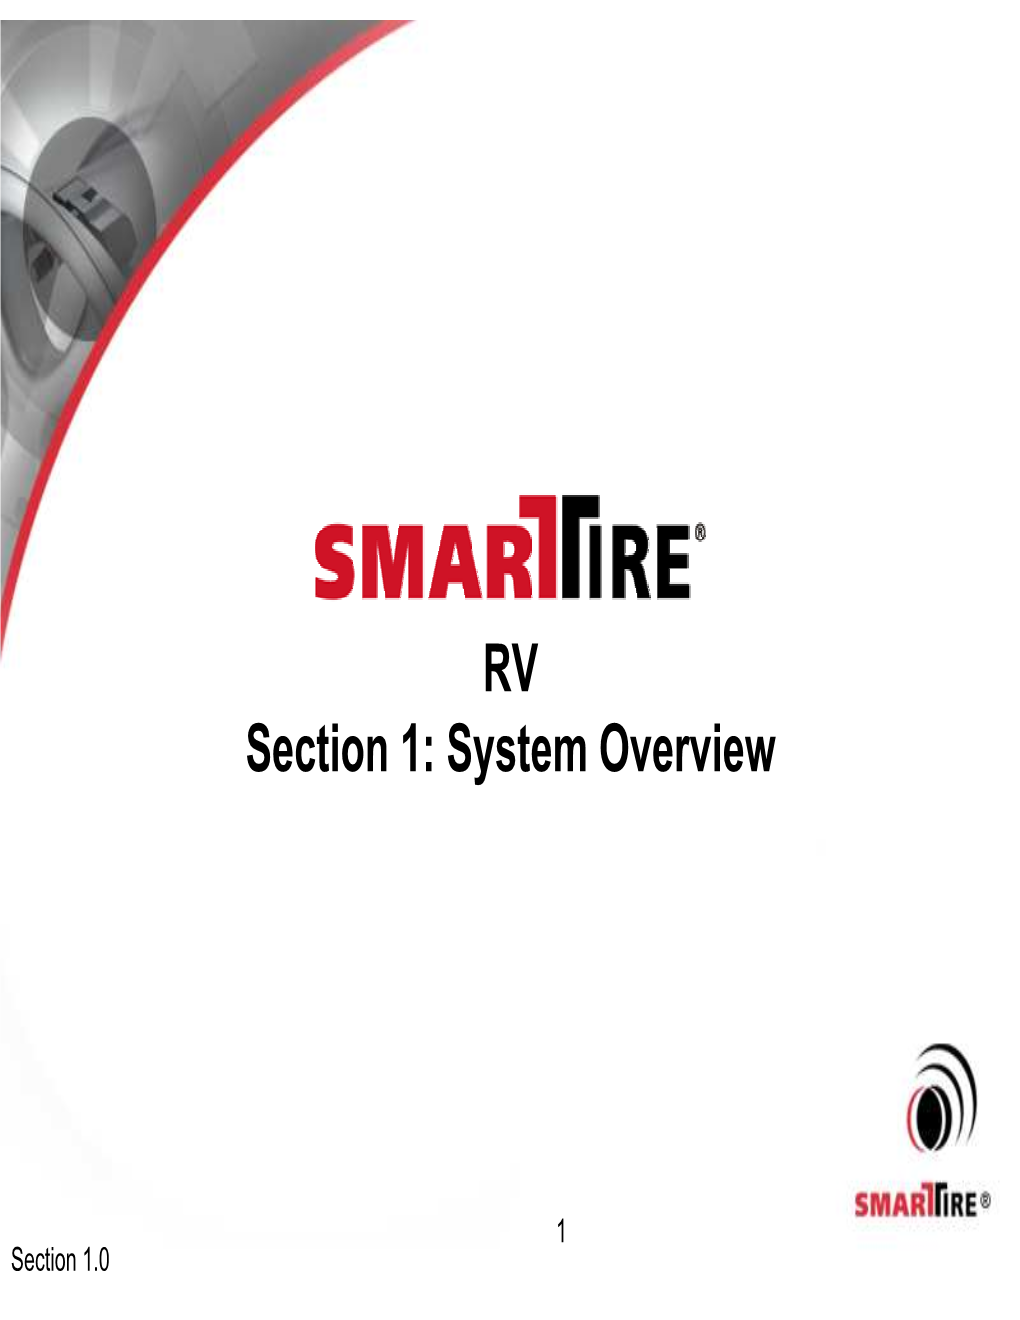 Smartire RV System Is Very Simple to Install